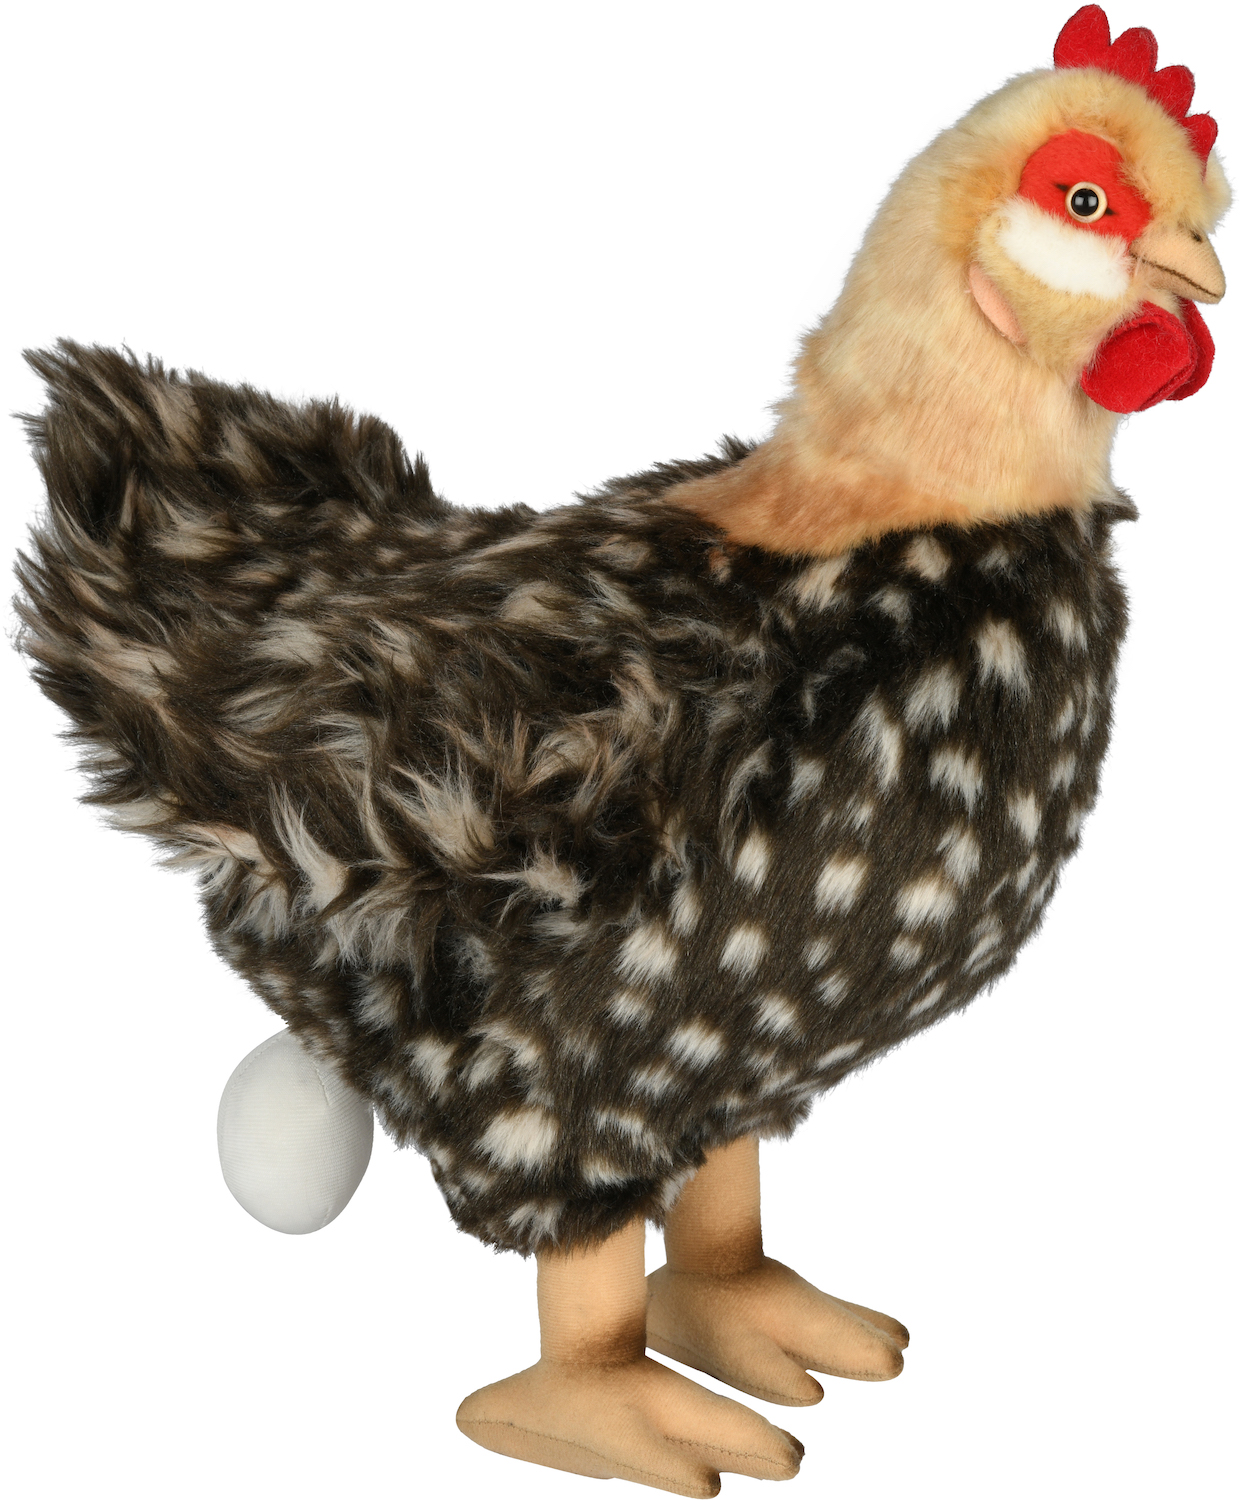 Hen With Egg - 37 cm (height) 